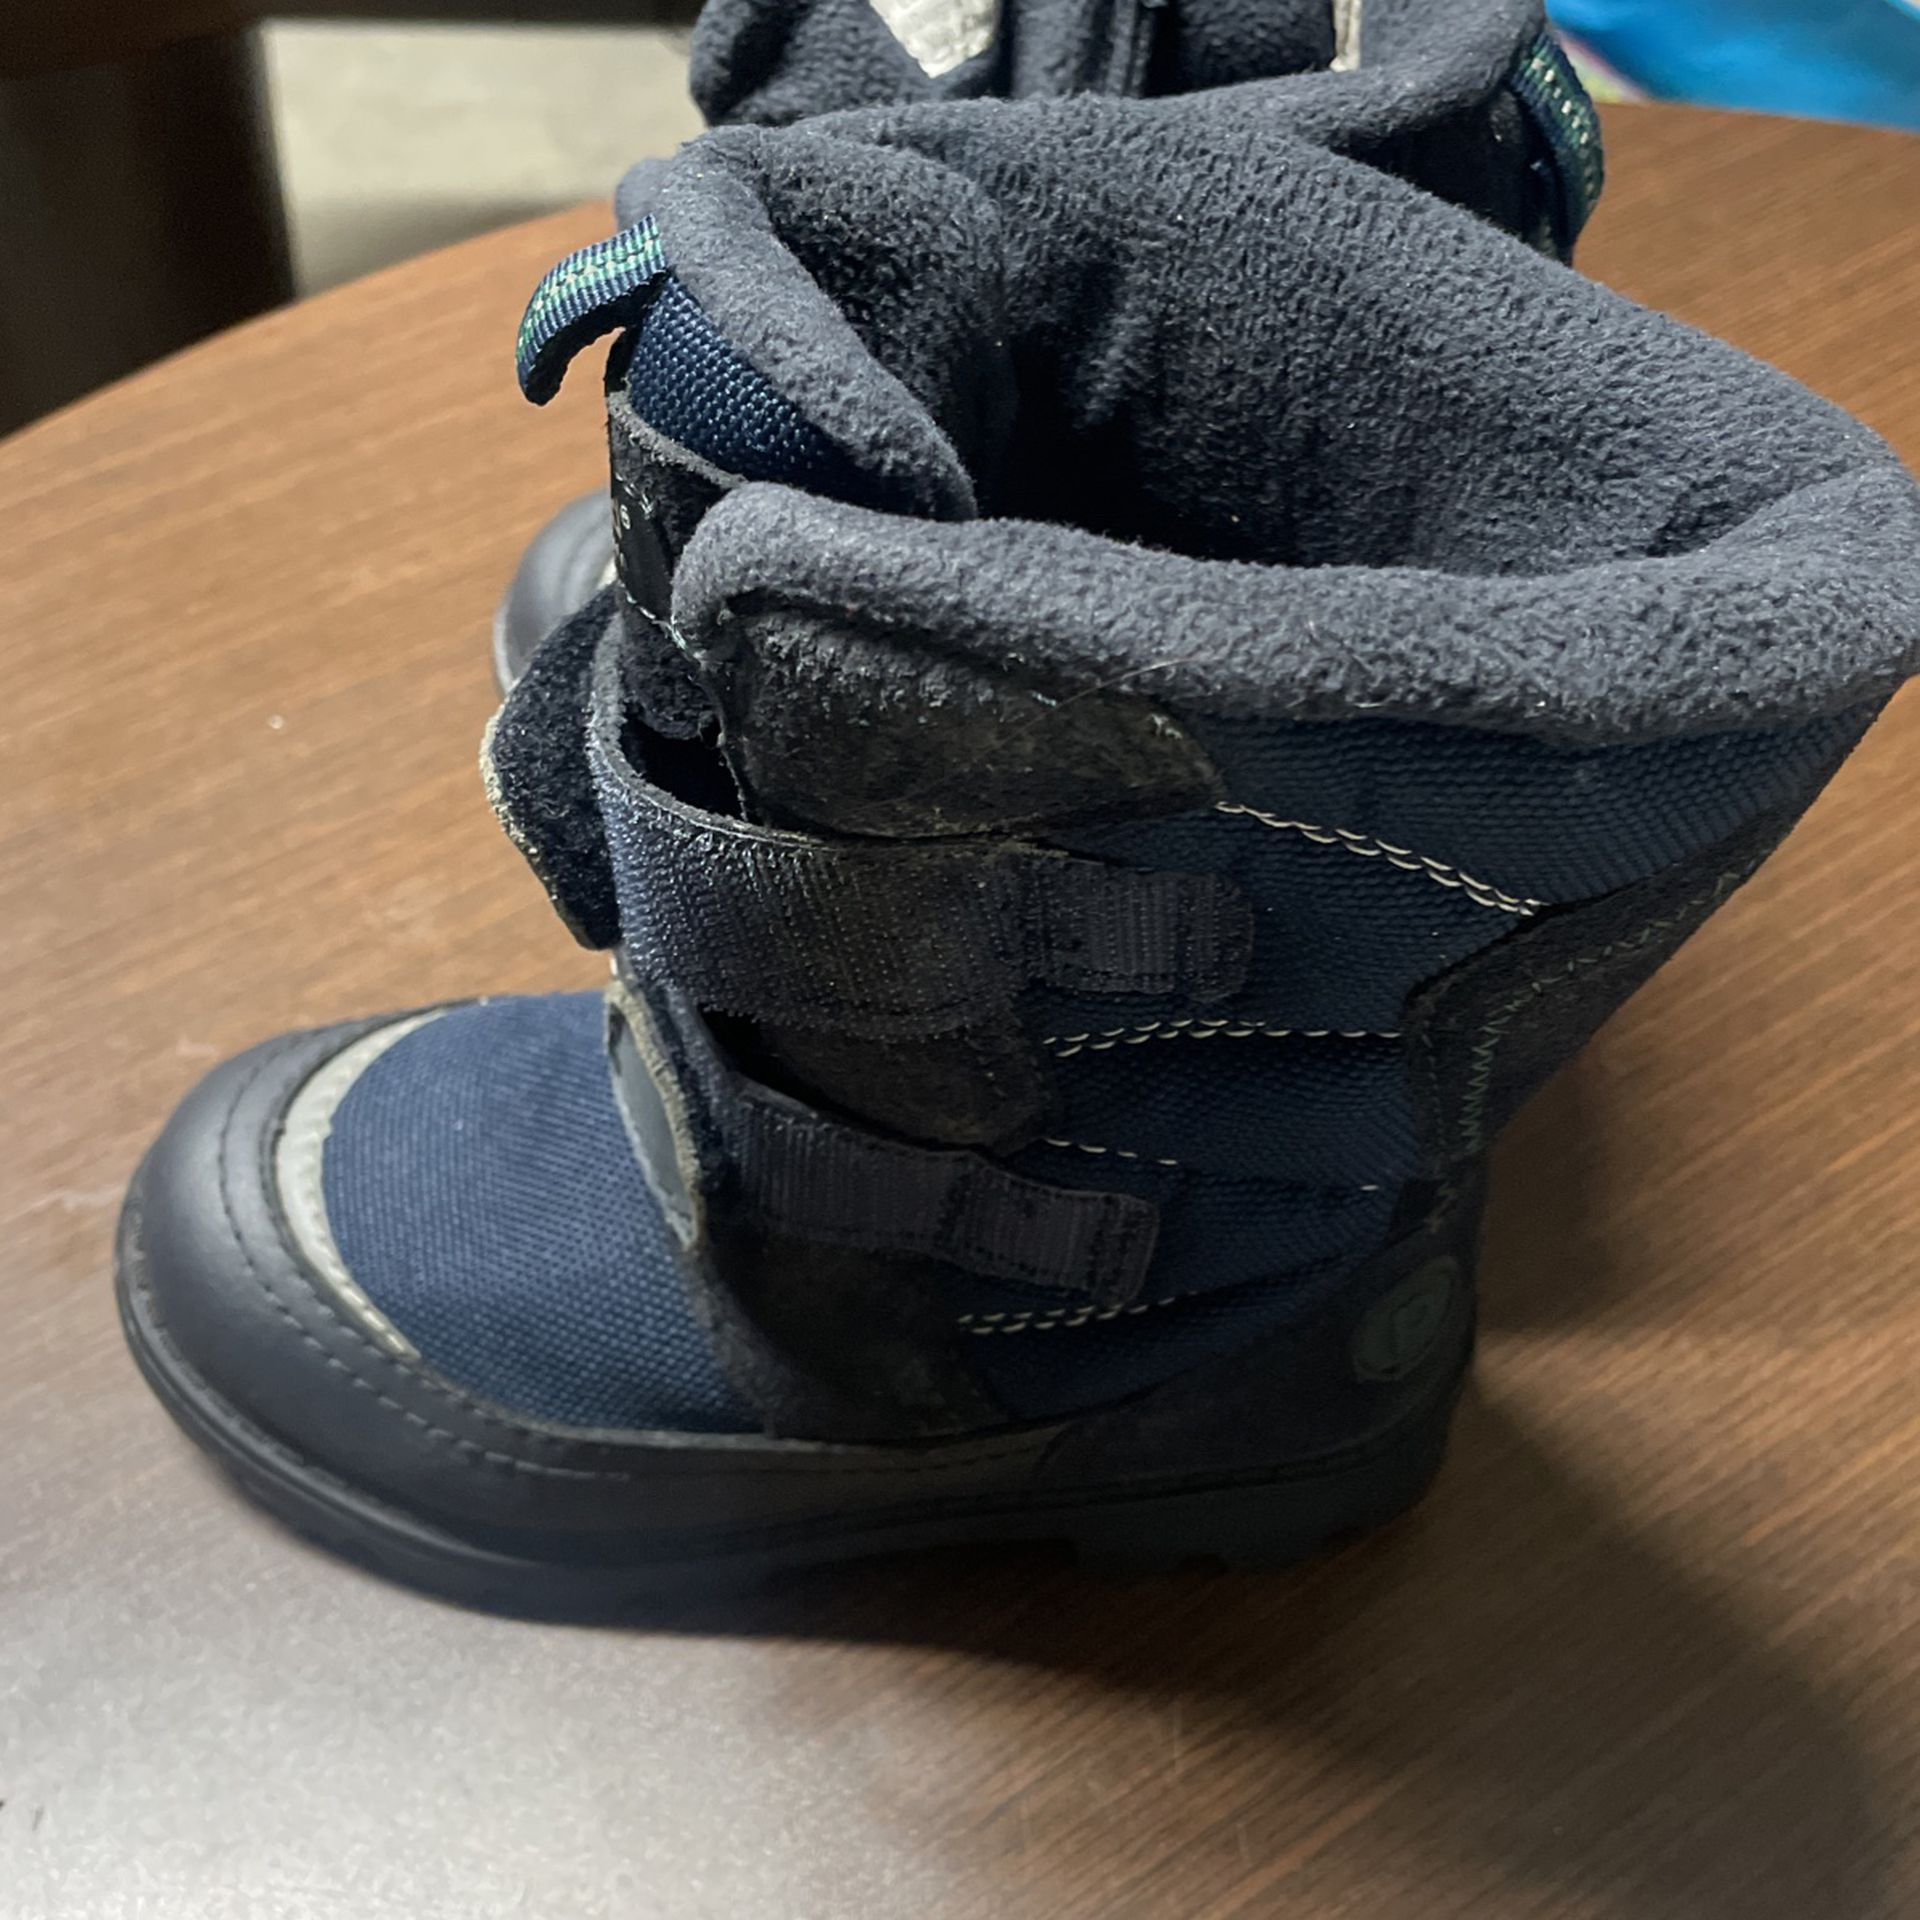 Toddler Pedi Ped Snow Boots Size:11-11.5 